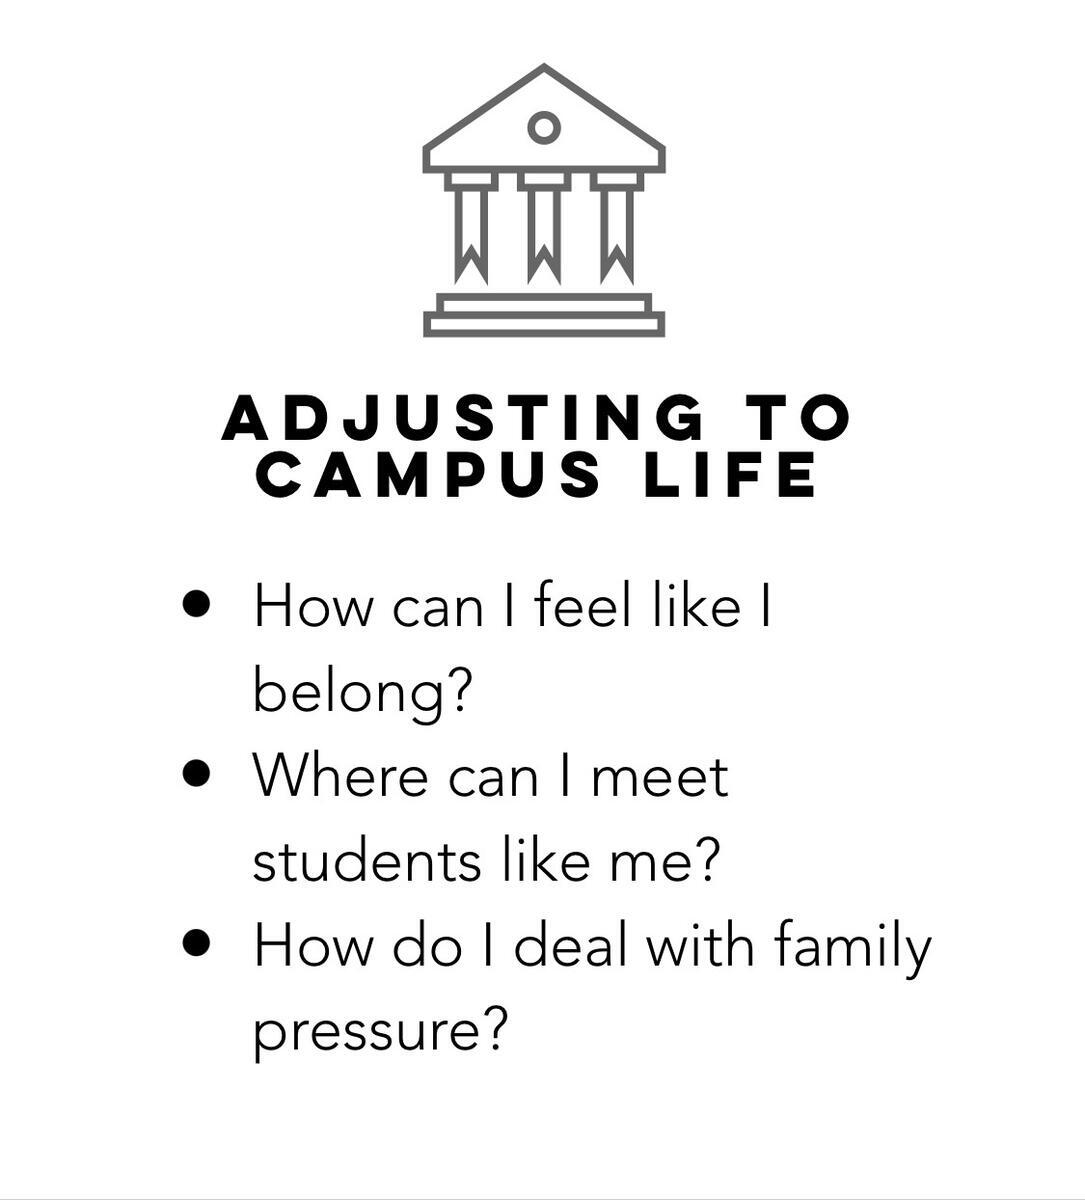 Adjusting to campus life. How can I feel like I belong? Where can I meet students like me? How do I deal with family pressure?